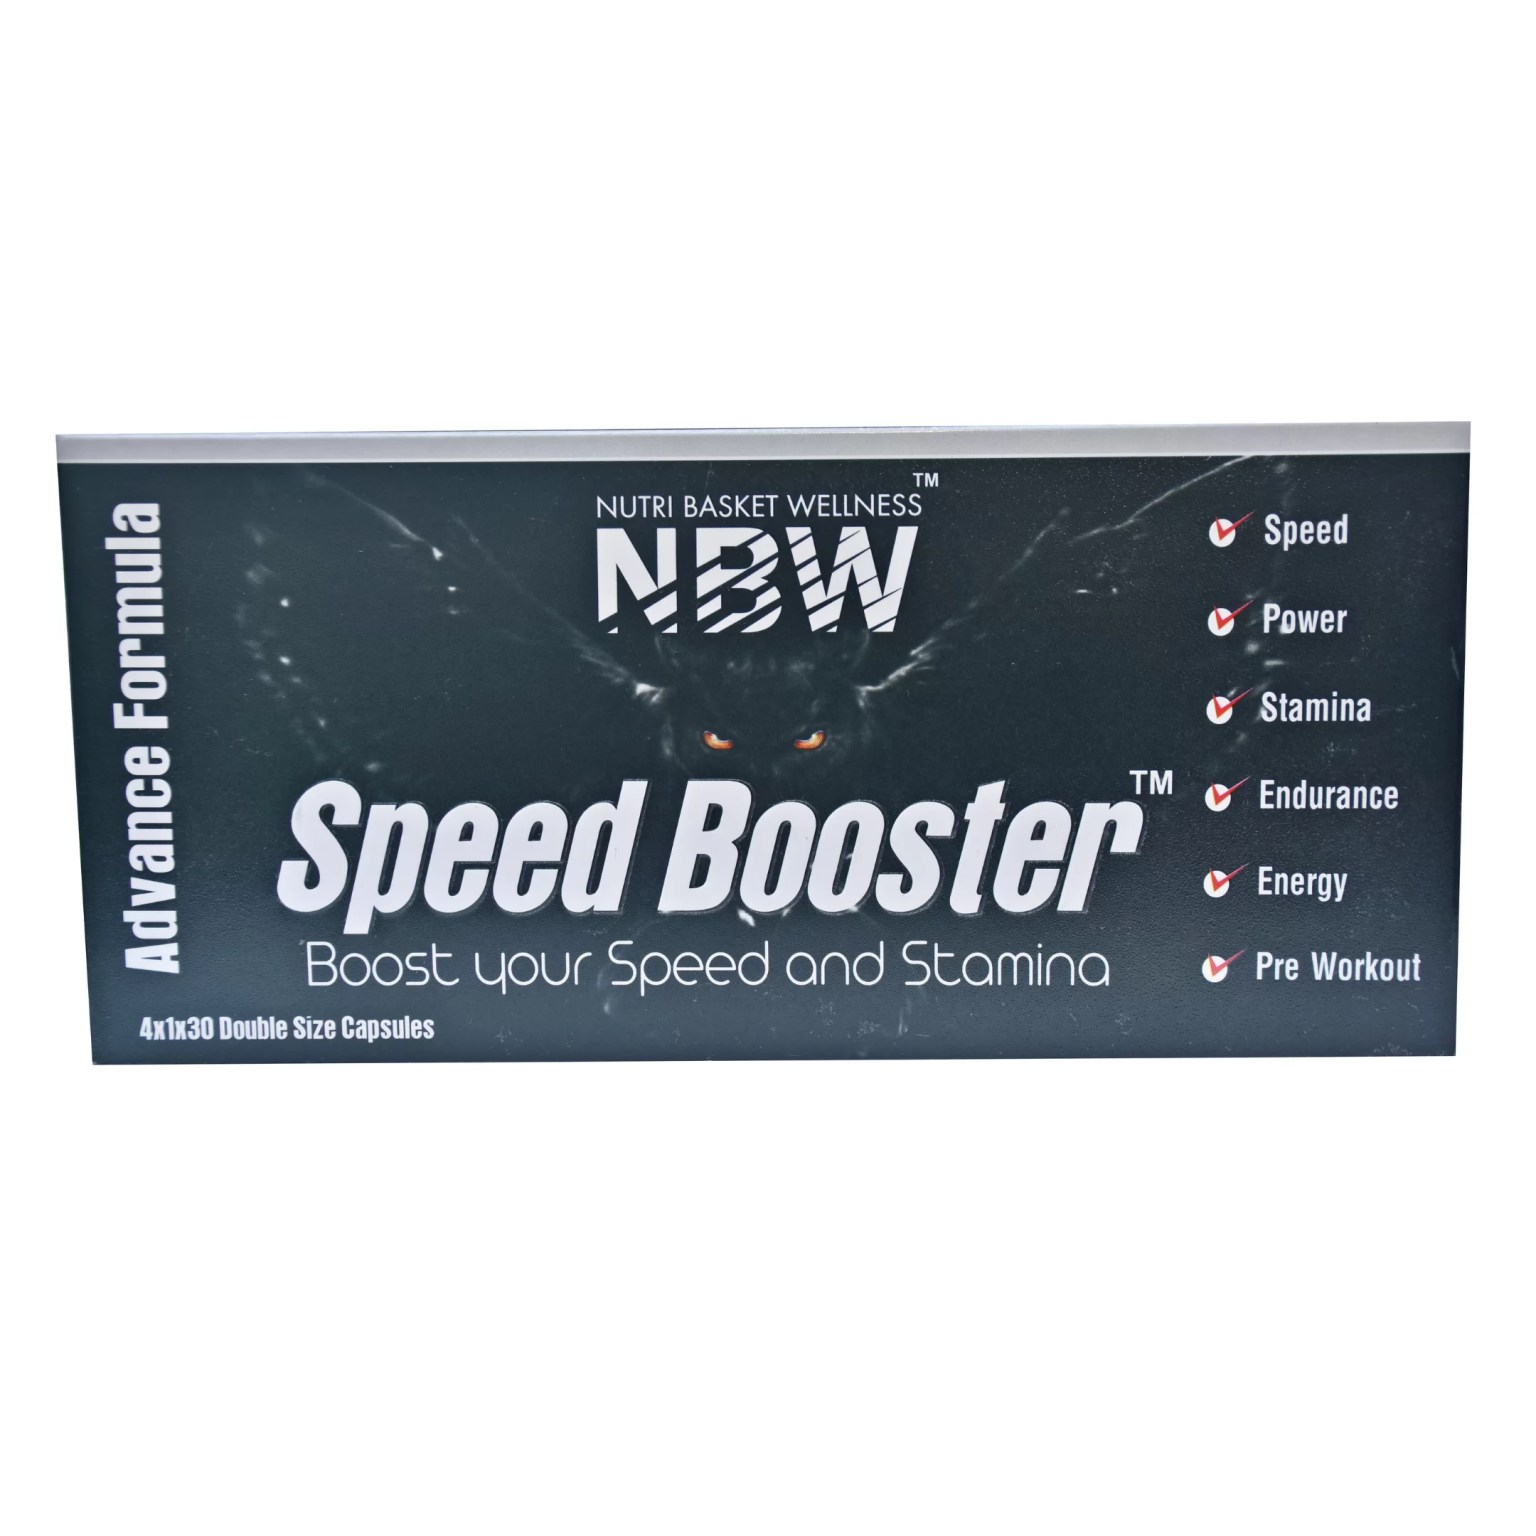 https://proteinbasket.com/product/nbw-speed-booster/ServicesGurgaon